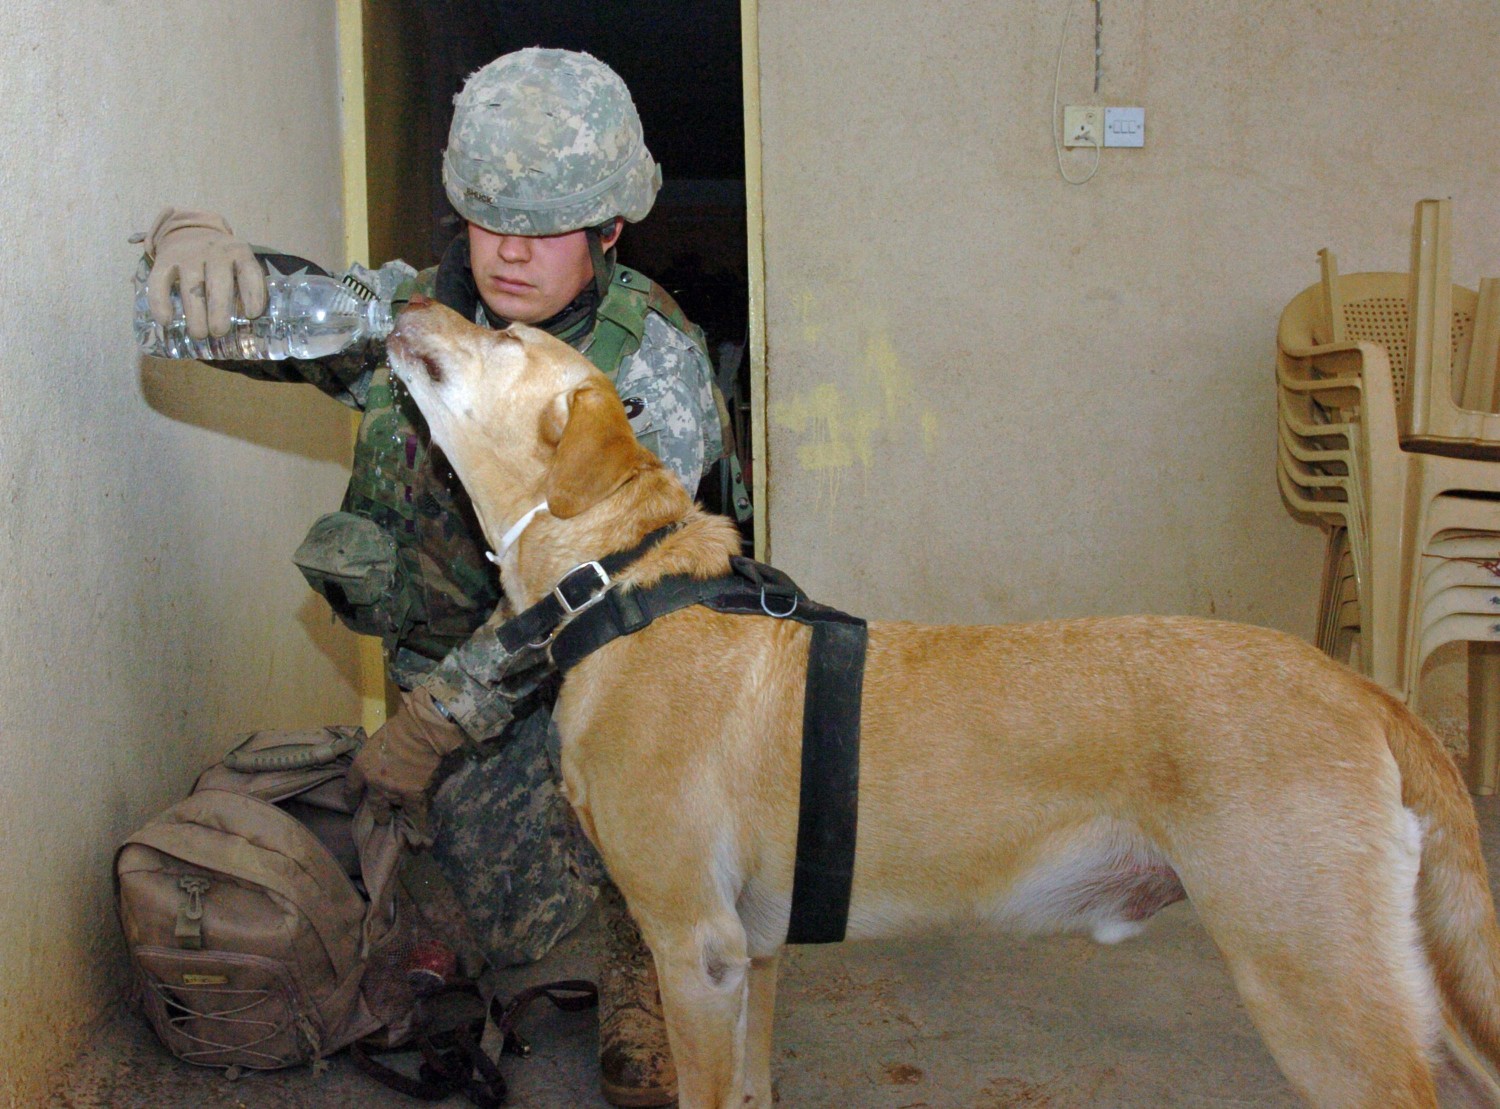 Staff Sgt. Chuck Shuck and his K9 partner, Sgt. 1st Class Gabe, both with 178th Military Police Detachment, take a break to hydrate in the village of Shukran, near Forward Operating Base Q-West. U.S. Army photo by Spc. Amanda Morrissey. 